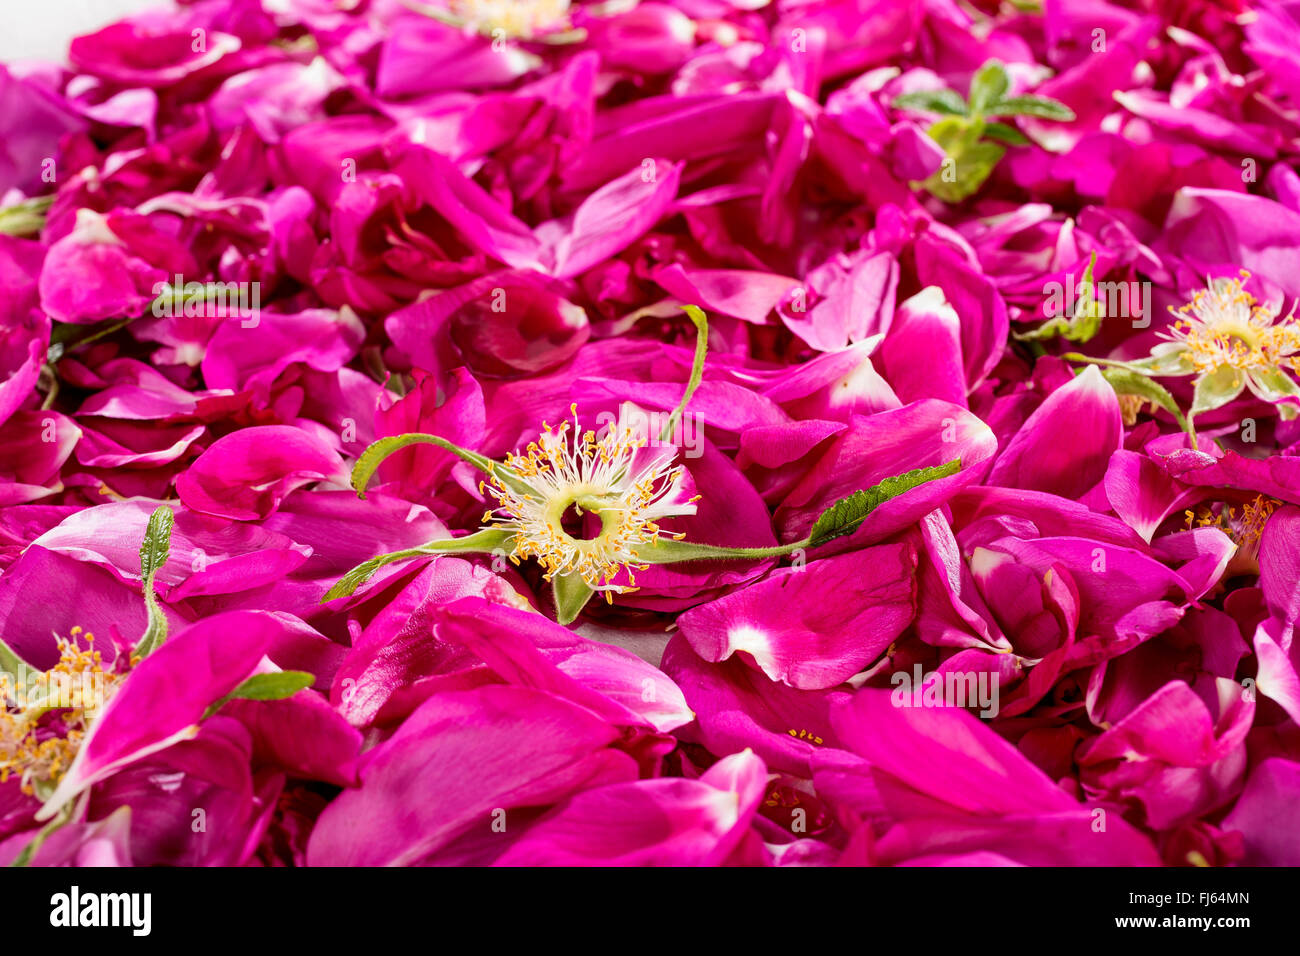 Rugosa rose, Japanese rose (Rosa rugosa), collected rose petals, are dried for rose tea, Germany Stock Photo